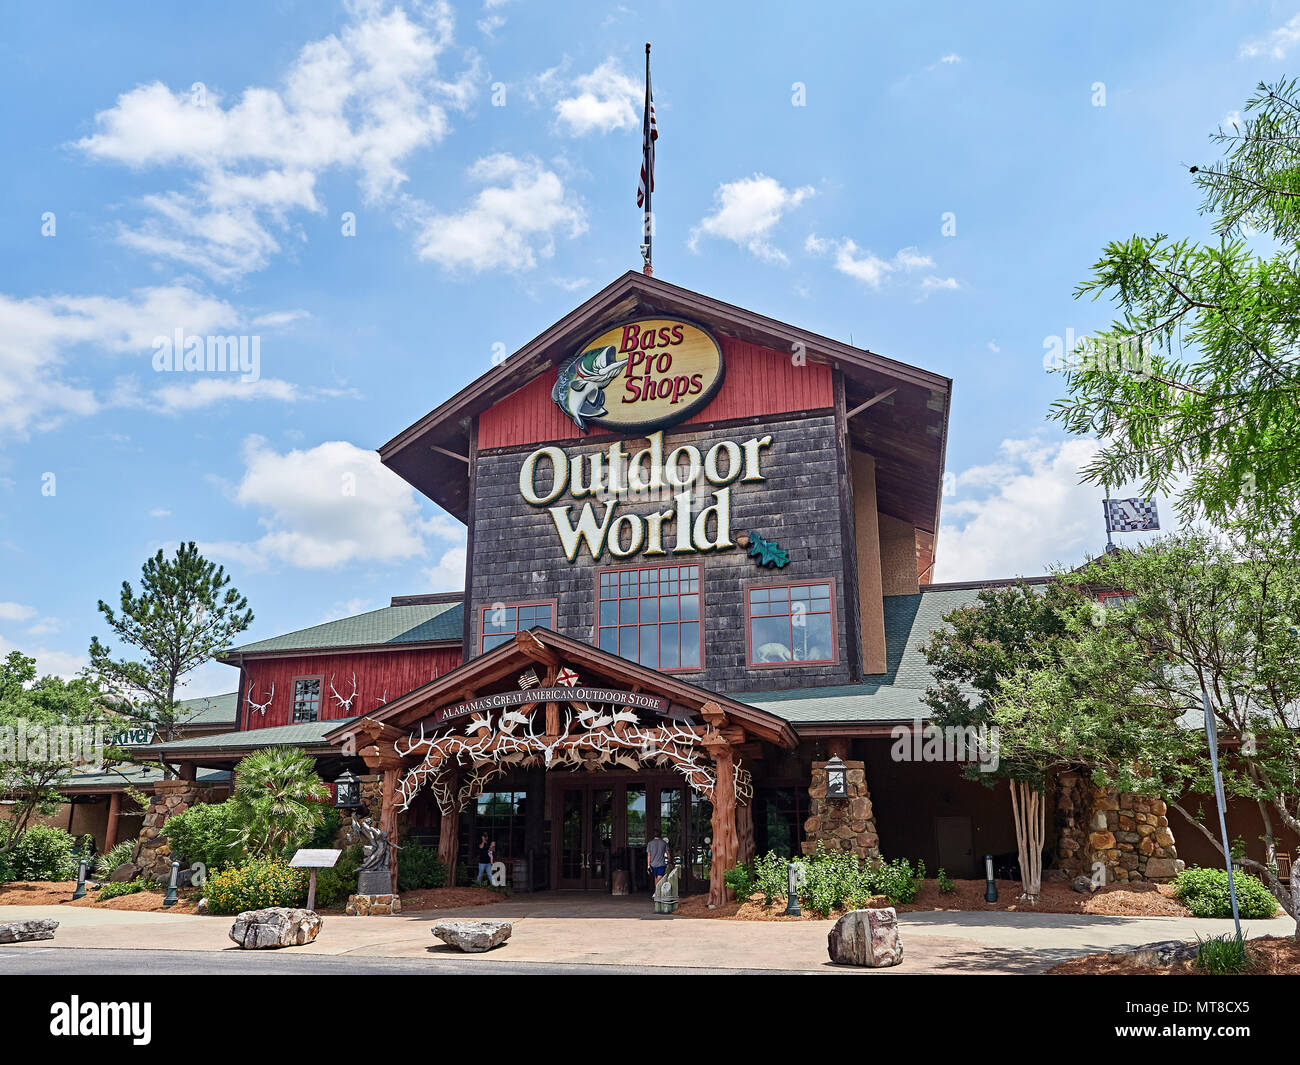 Bass Pro Shops Outdoor World front exterior entrance of the mega sized camping, hunting, fishing, and boating store or business in Prattville Alabama. Stock Photo